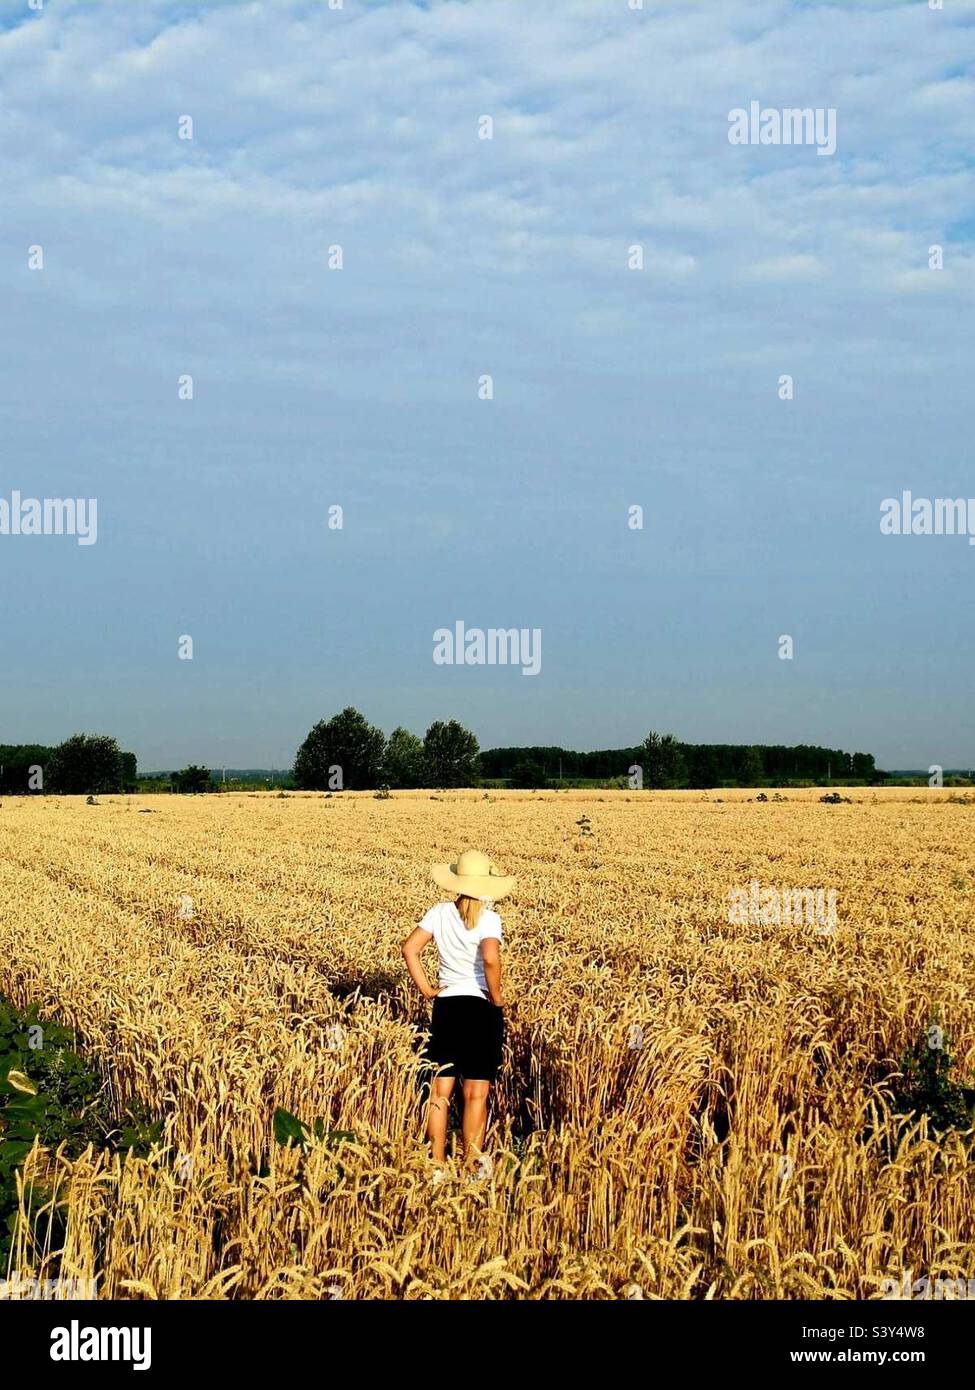 A hot working day begins with a view of the crops.  A lady in a yellow ripe wheat field.  Lady is a breeder and creator of new varieties of wheat. Stock Photo